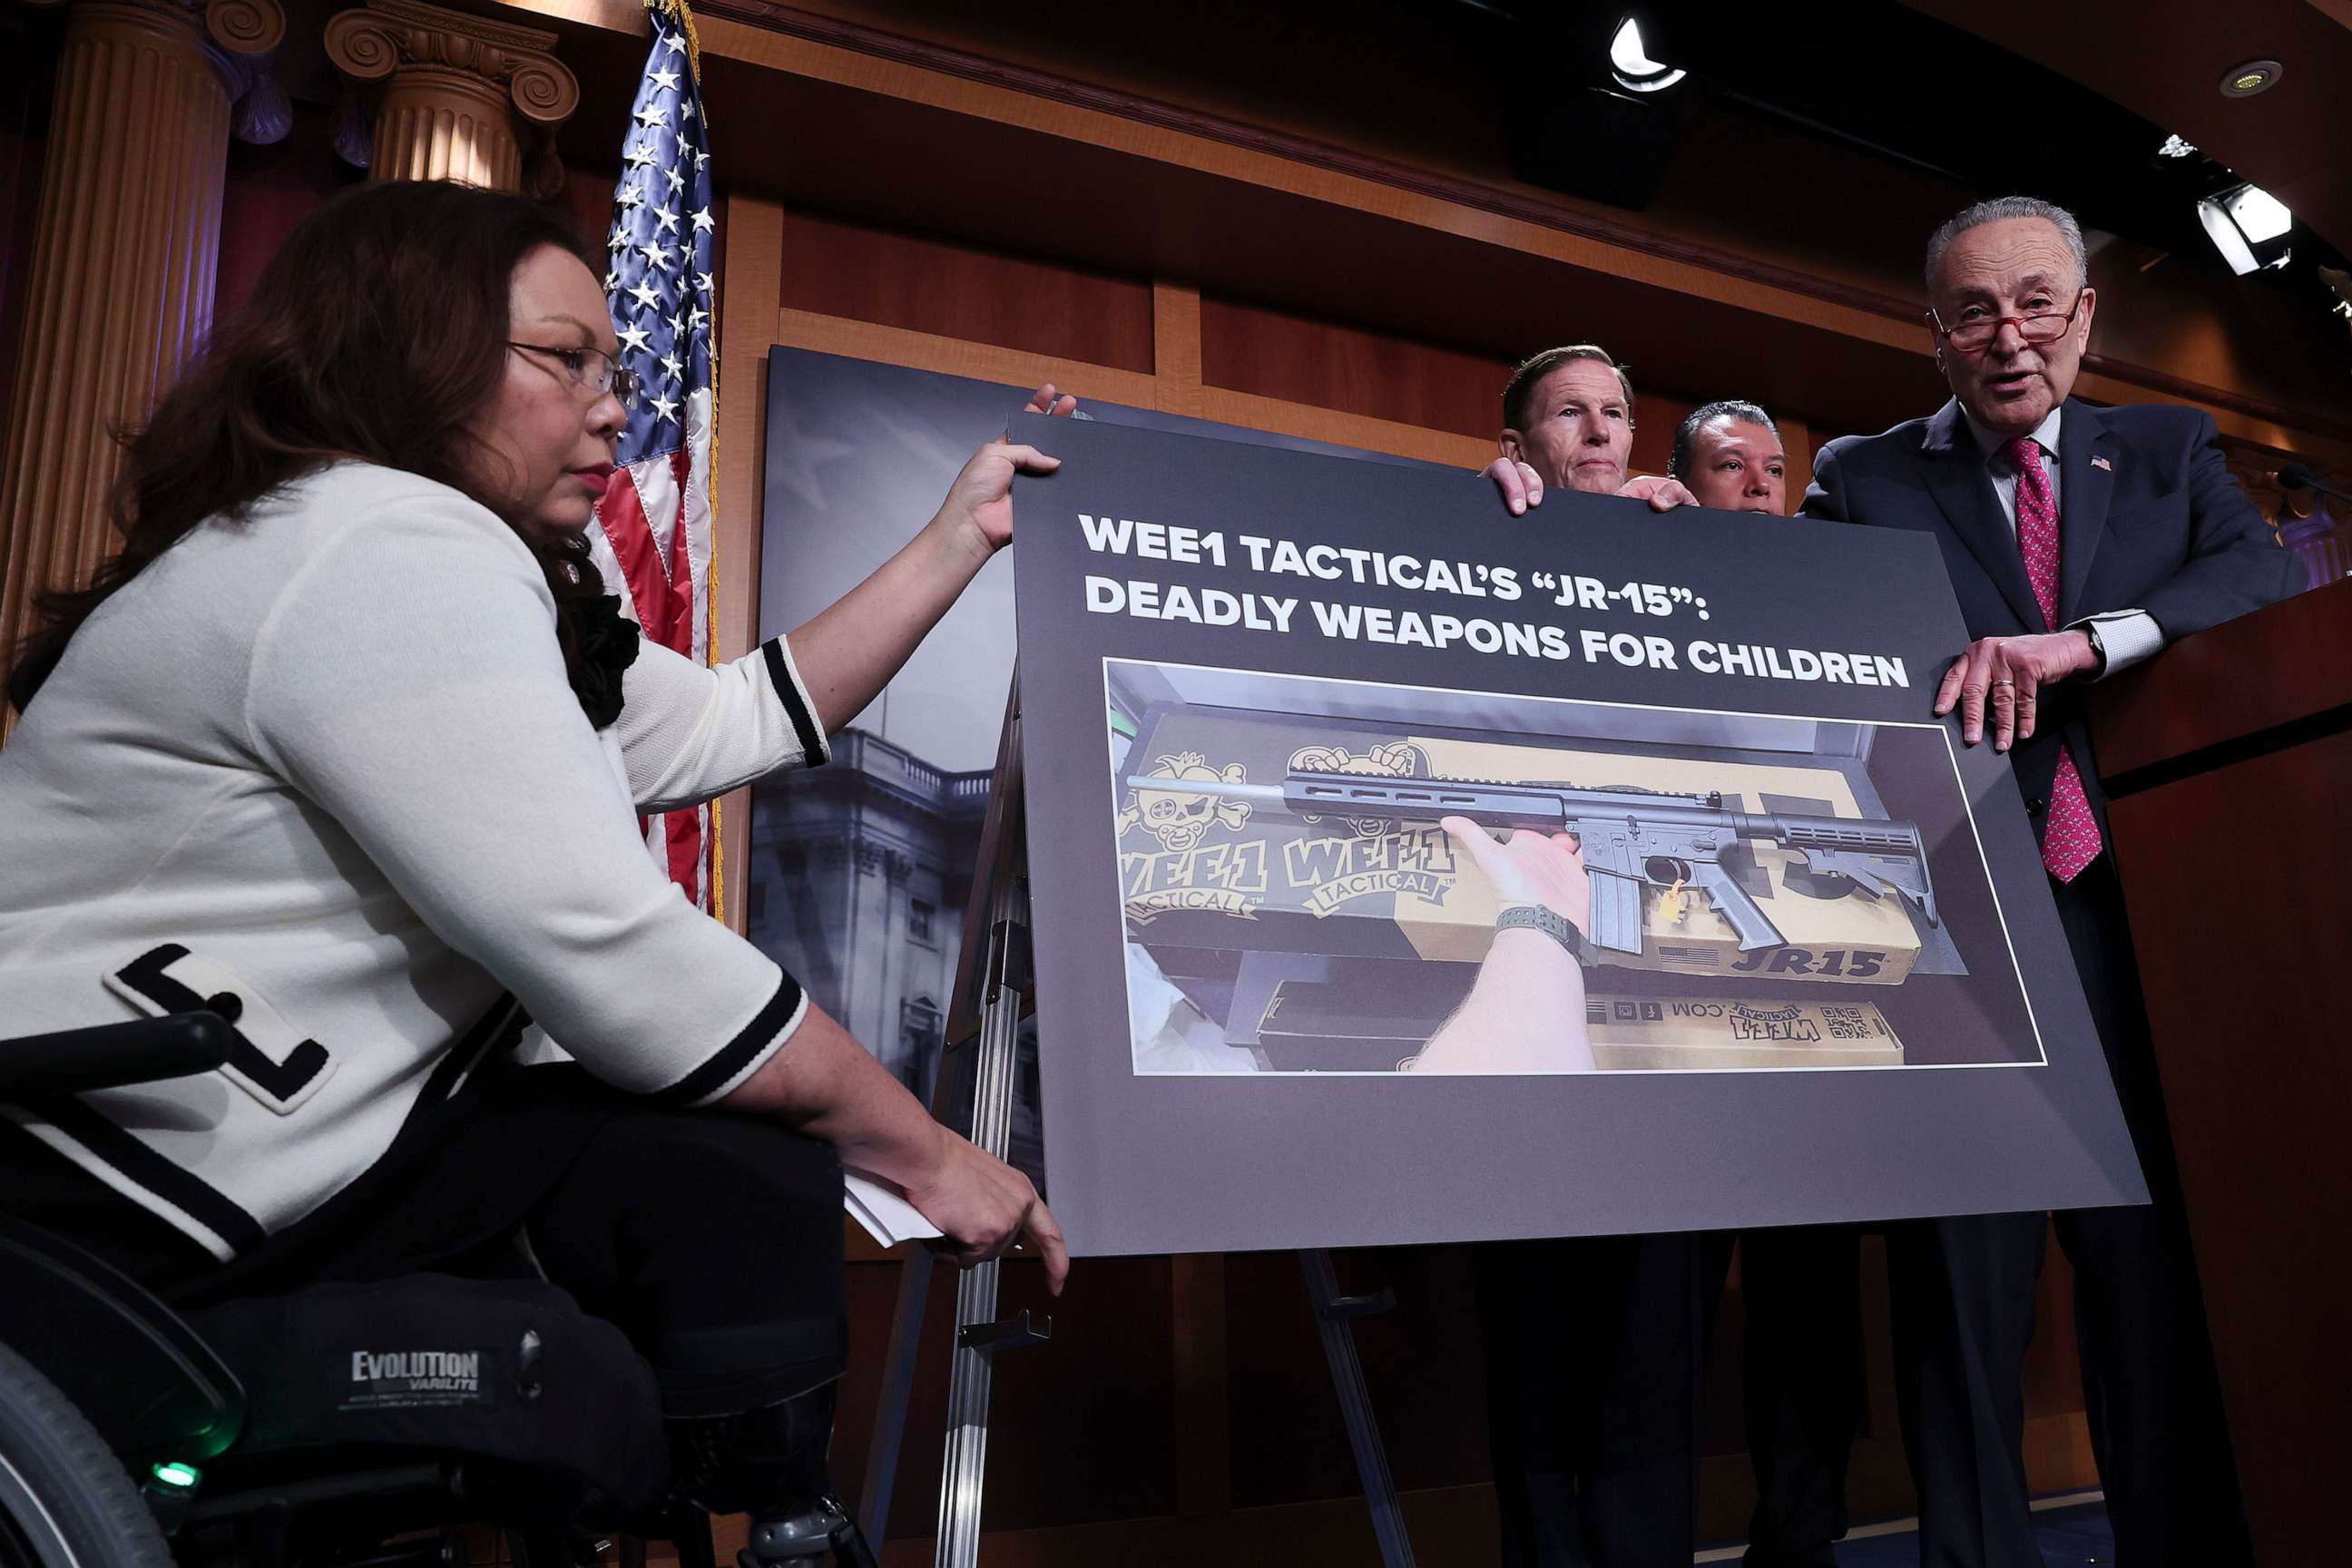 PHOTO: Senate Majority Leader Chuck Schumer (D-NY) joins with other Democratic members of the Senate at a U.S. Capitol press conference condemning WEE1 Tactical's "JR-15" rifle marketed to children Jan. 26, 2023 in Washington, DC.